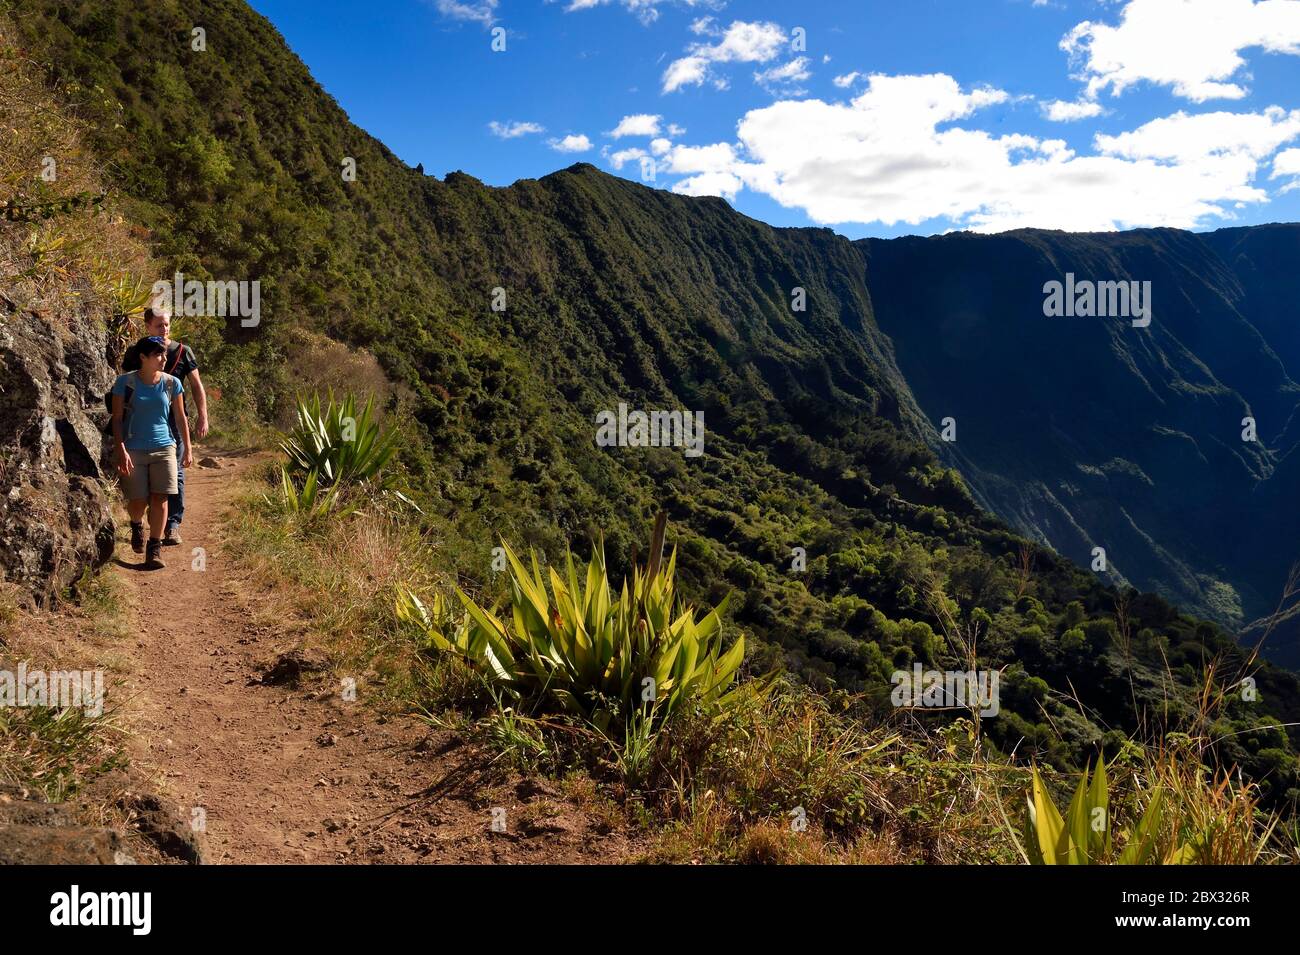 France, Reunion island (French overseas department), Reunion National Park listed as World heritage by UNESCO, La Possession, around village of Dos d'Ane, Roche Bouteille hike, hikers on the Cap Noir trail and the Cirque de Mafate on the right Stock Photo